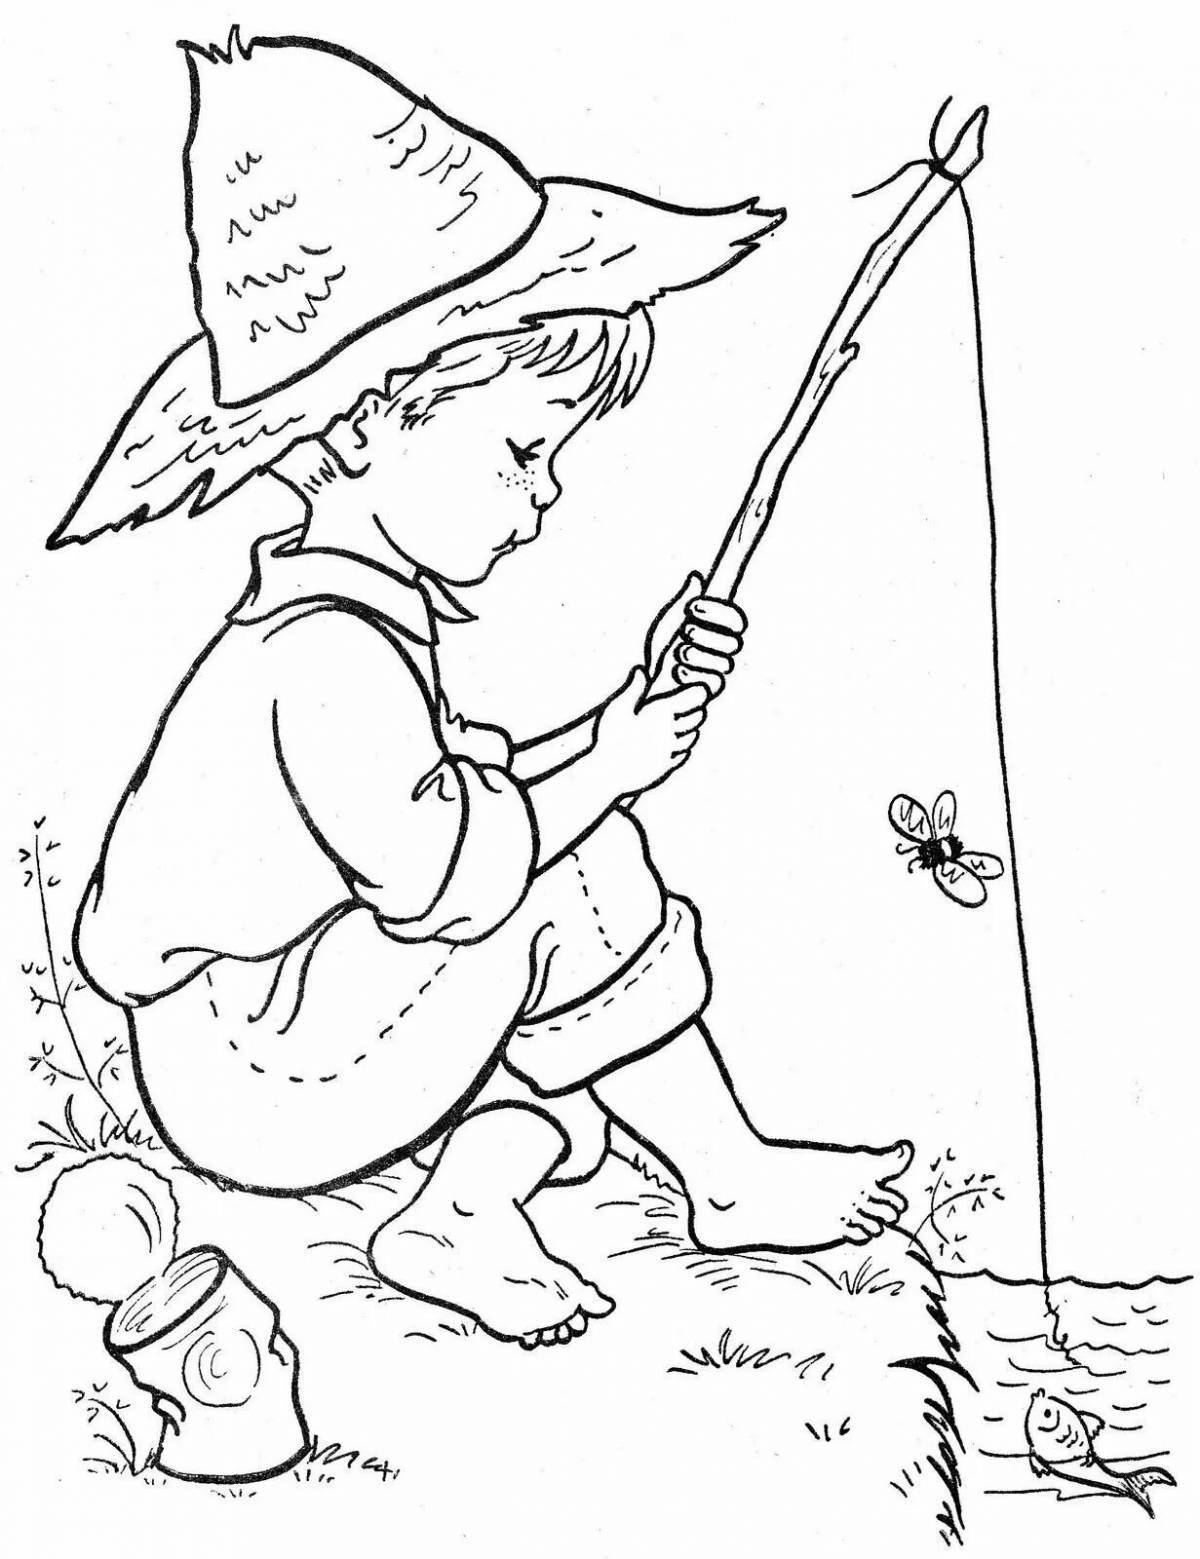 Colorful fisherman coloring page for kids